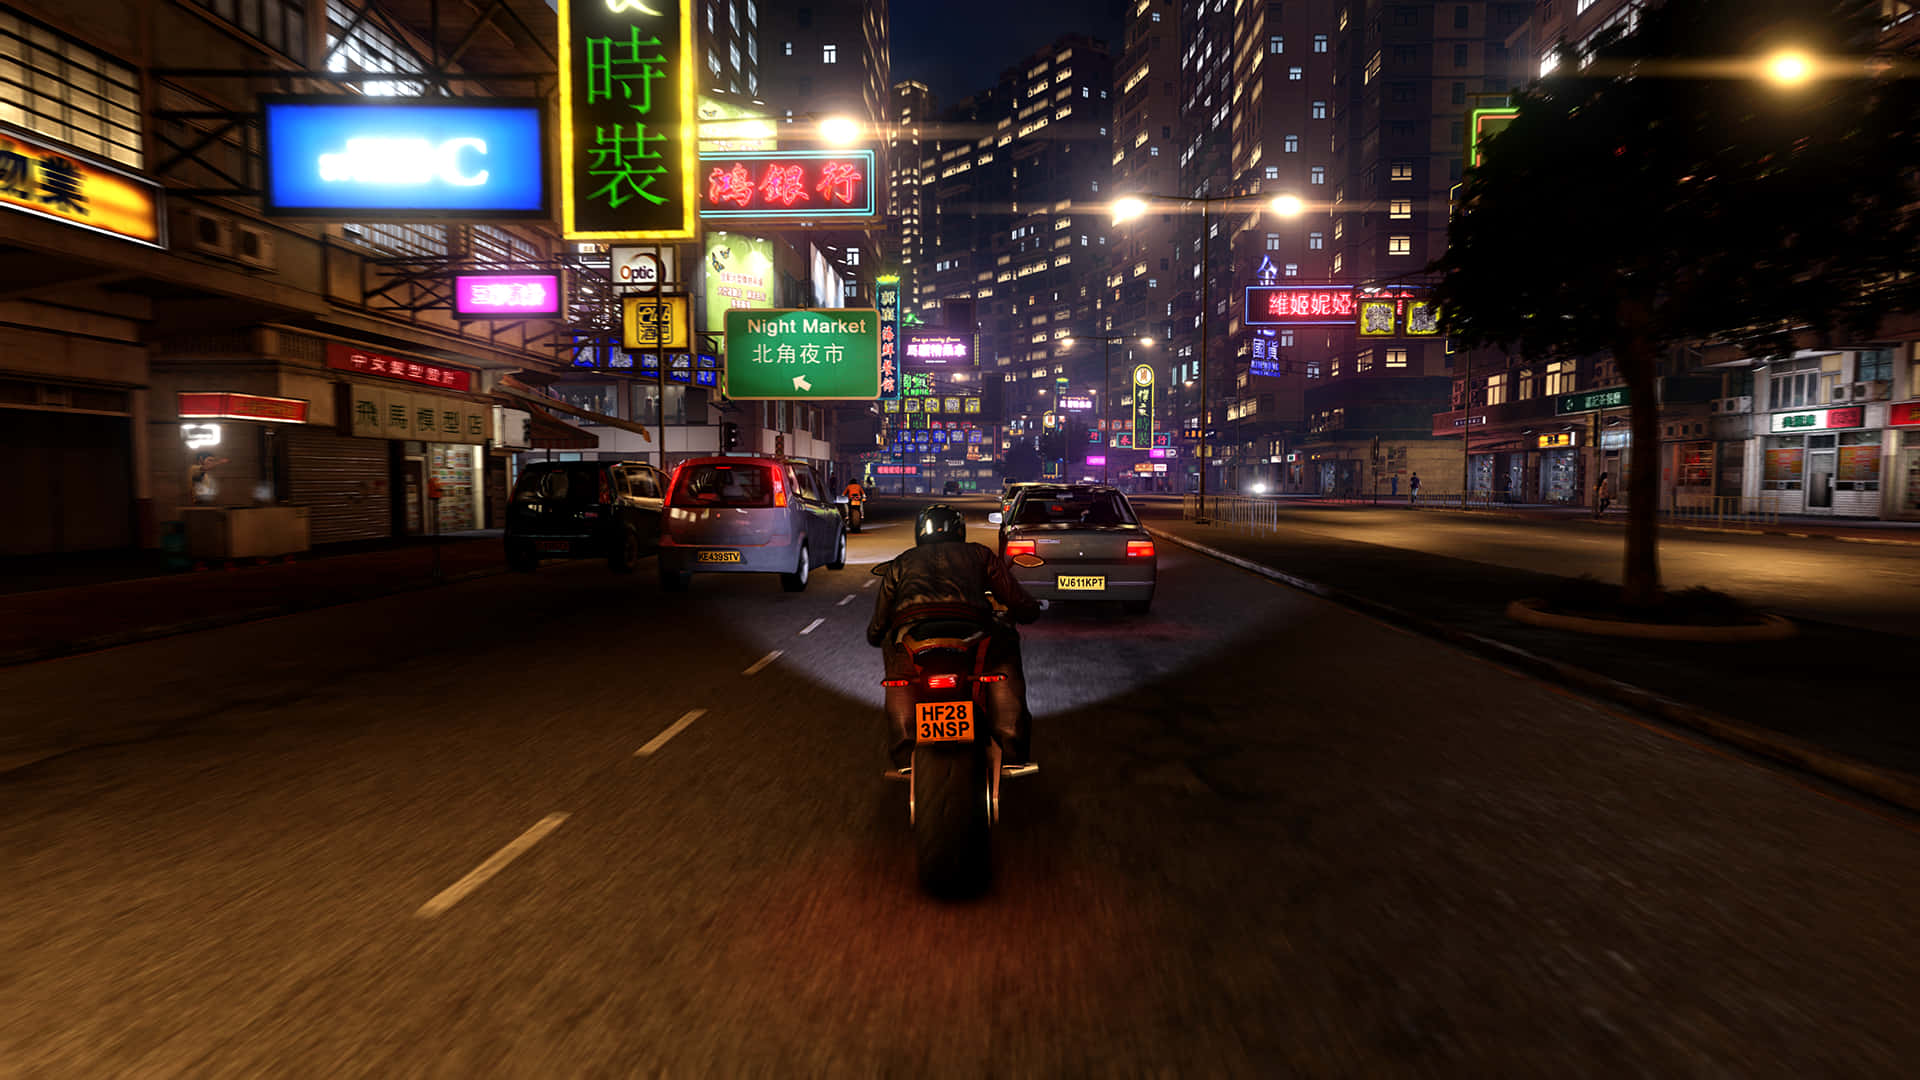 Best Sleeping Dogs Background Wei Shen Gameplay Riding Motorcycle